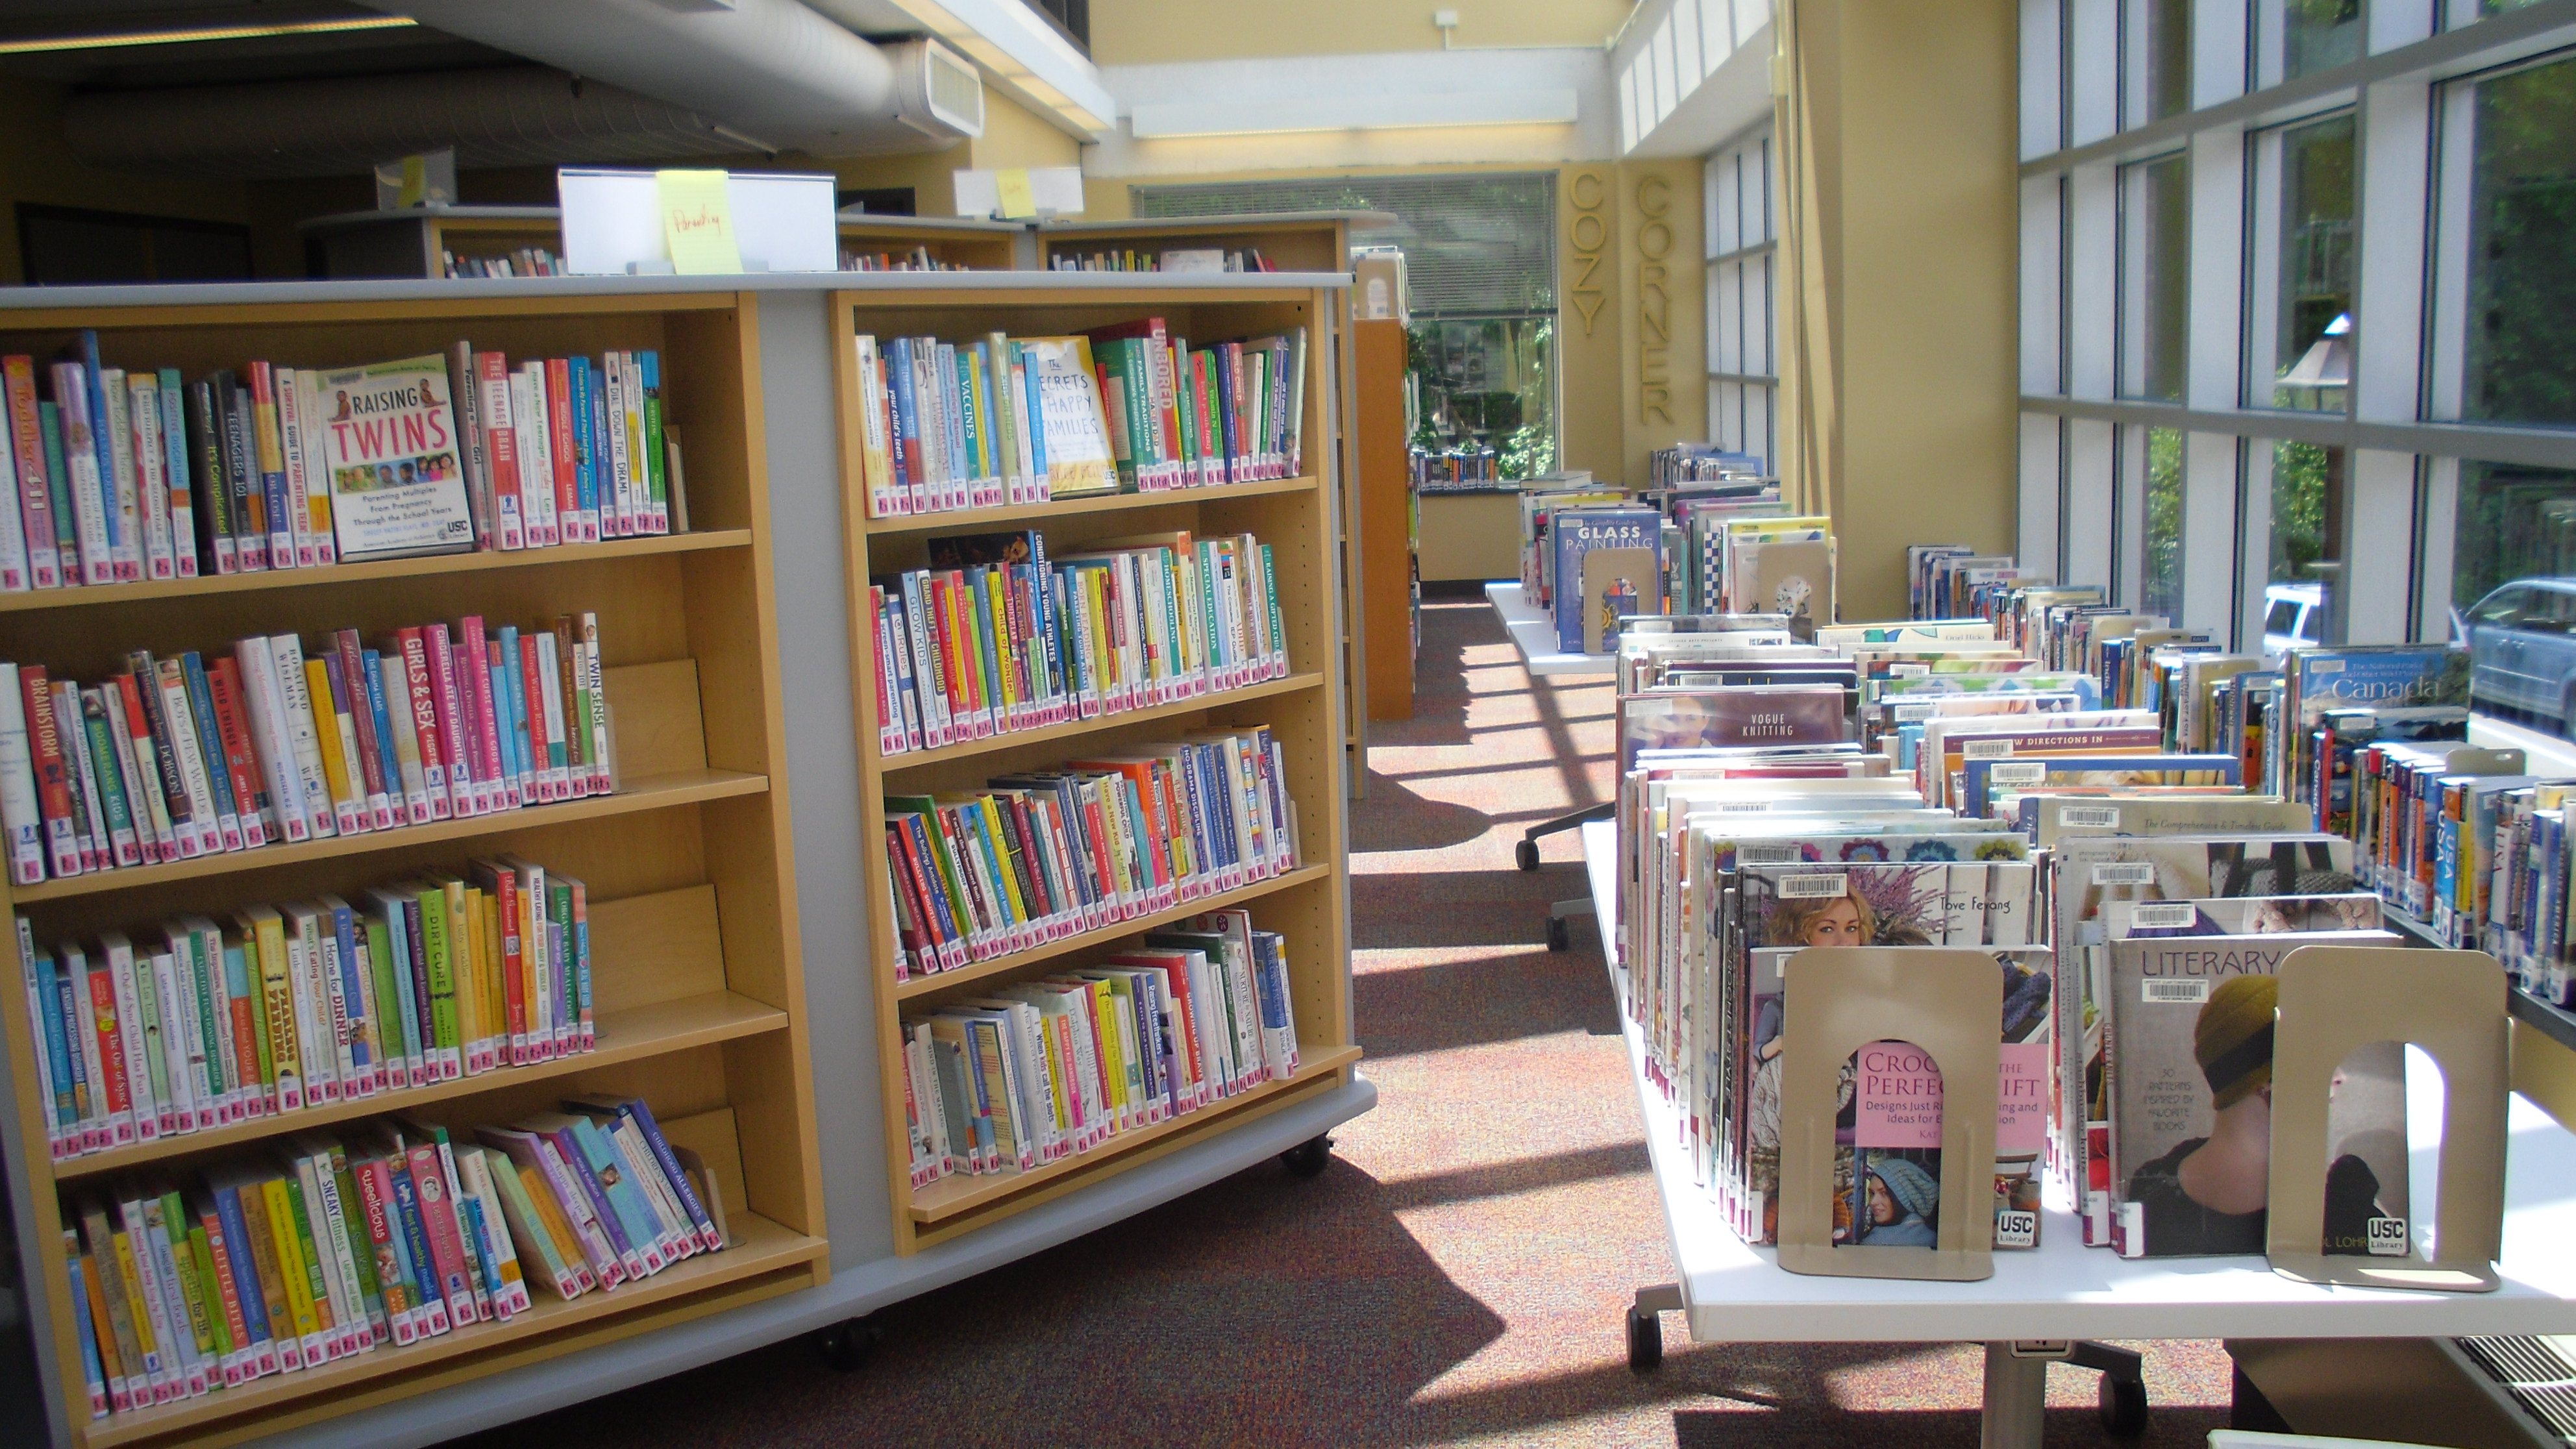 Staff at Upper St. Clair Township Re-shelving books onto new Performance Library Shelving